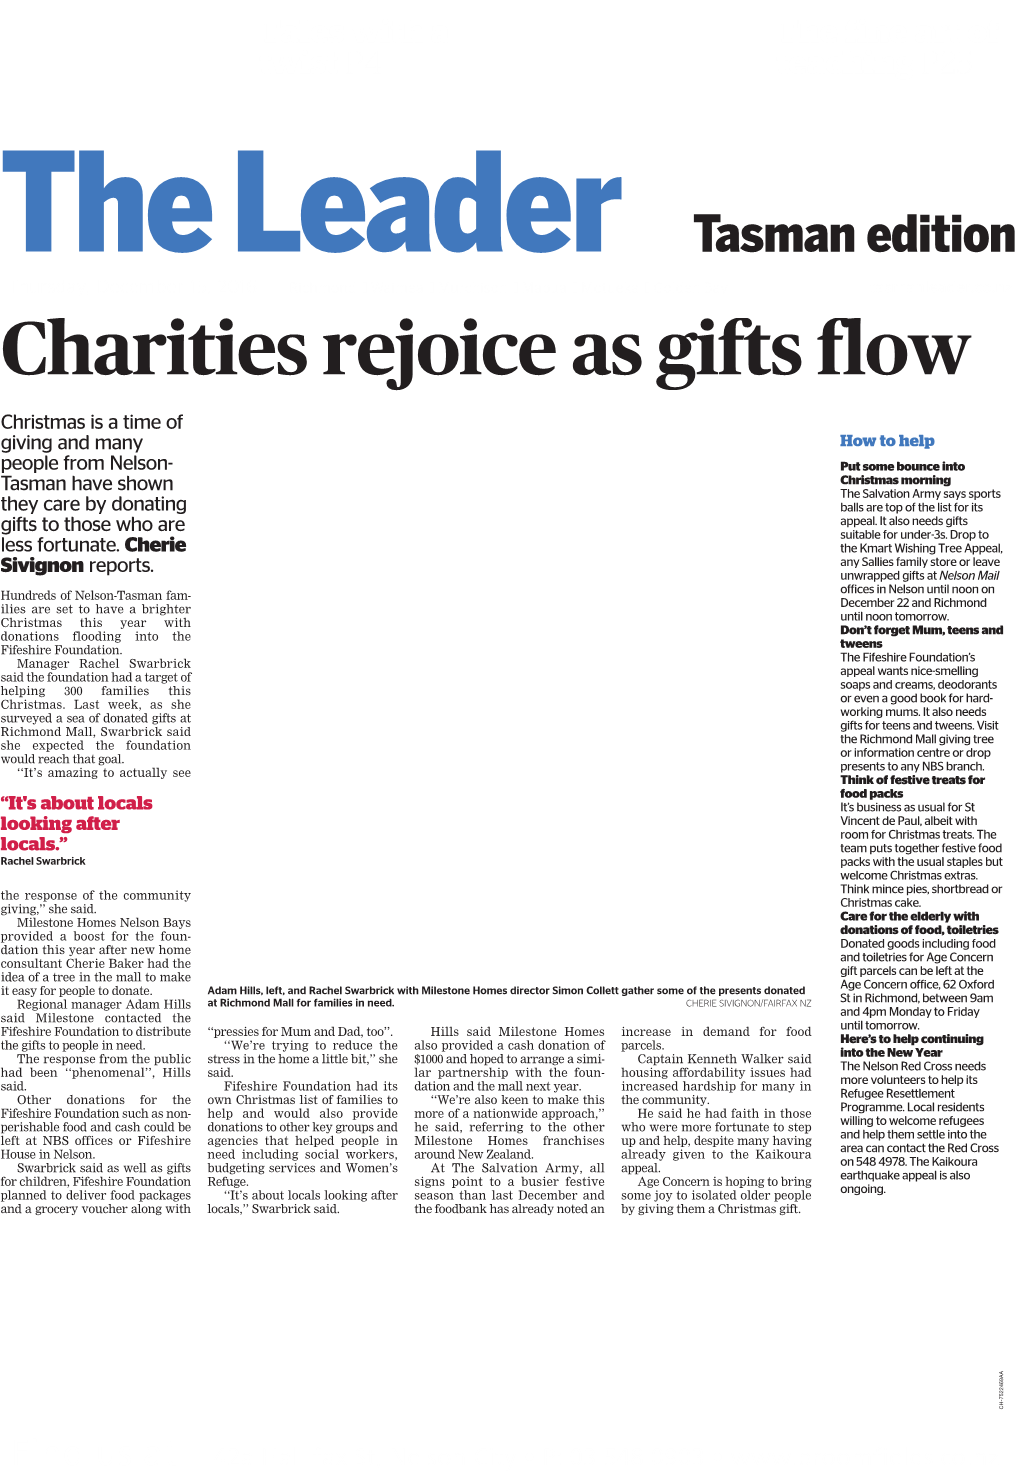 Charities Rejoice As Gifts Flow